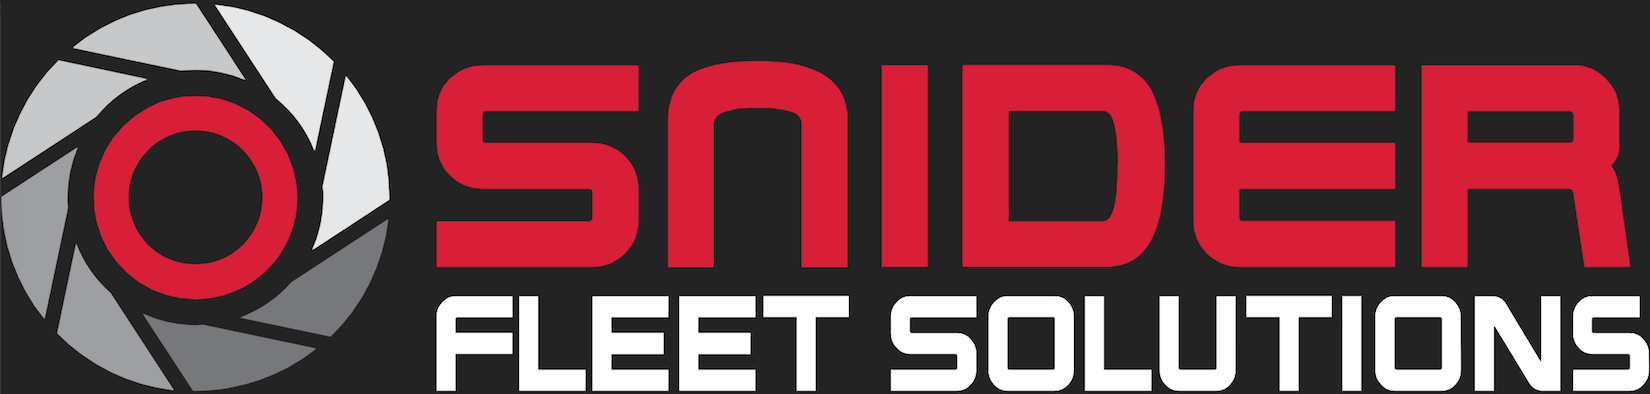 Snider Logo - Snider Fleet Solutions - Commercial Tires and Mechanical Service